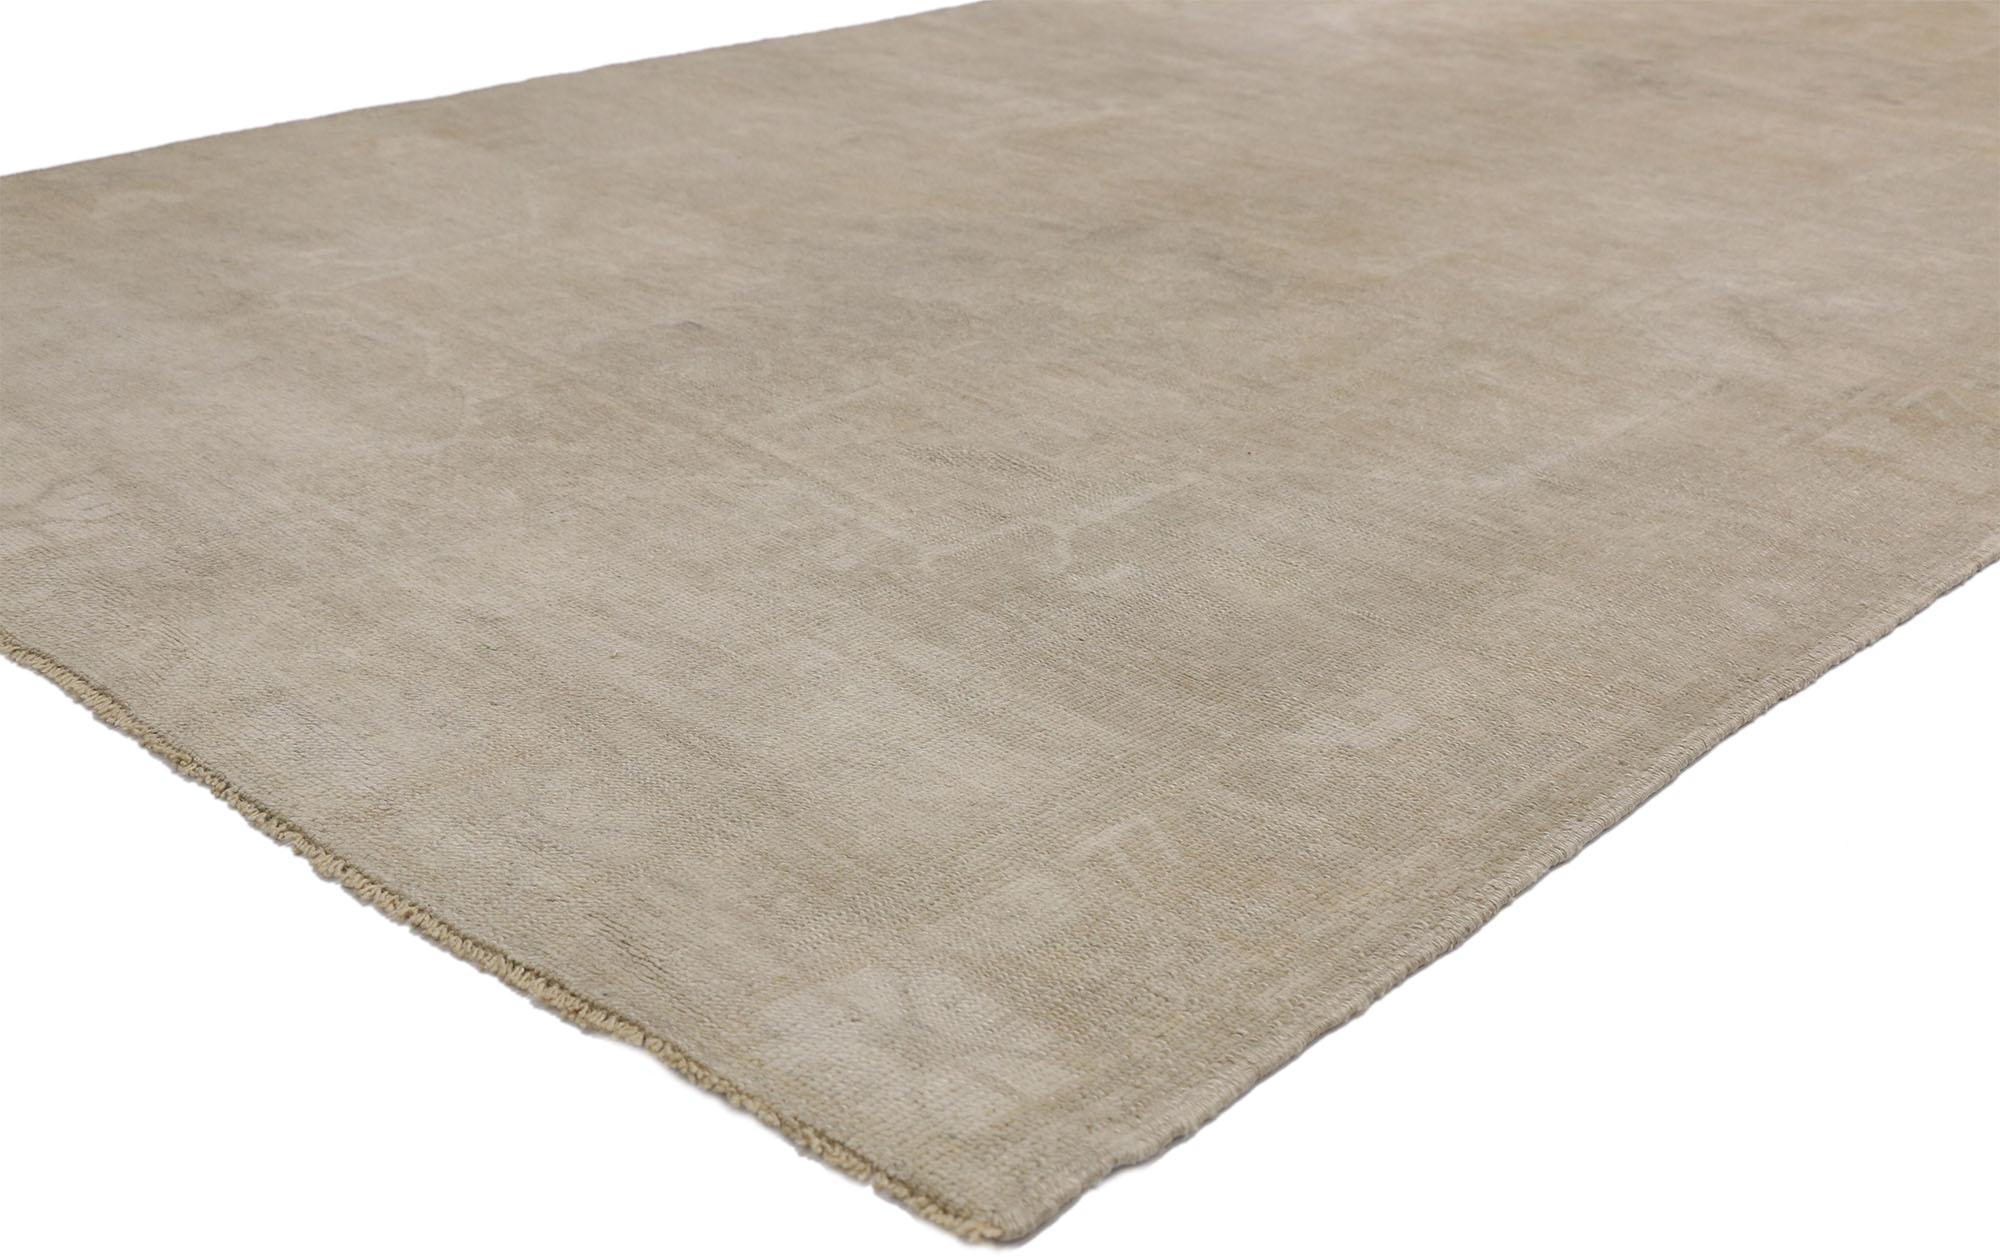 52474 Vintage Turkish Oushak Gallery Rug with Mission Style, Wide Hallway Runner. Possessing an ethereal color palette with atmospheric subtlety this hand-knotted wool vintage Turkish Oushak gallery rug emanates style from every corner. Three